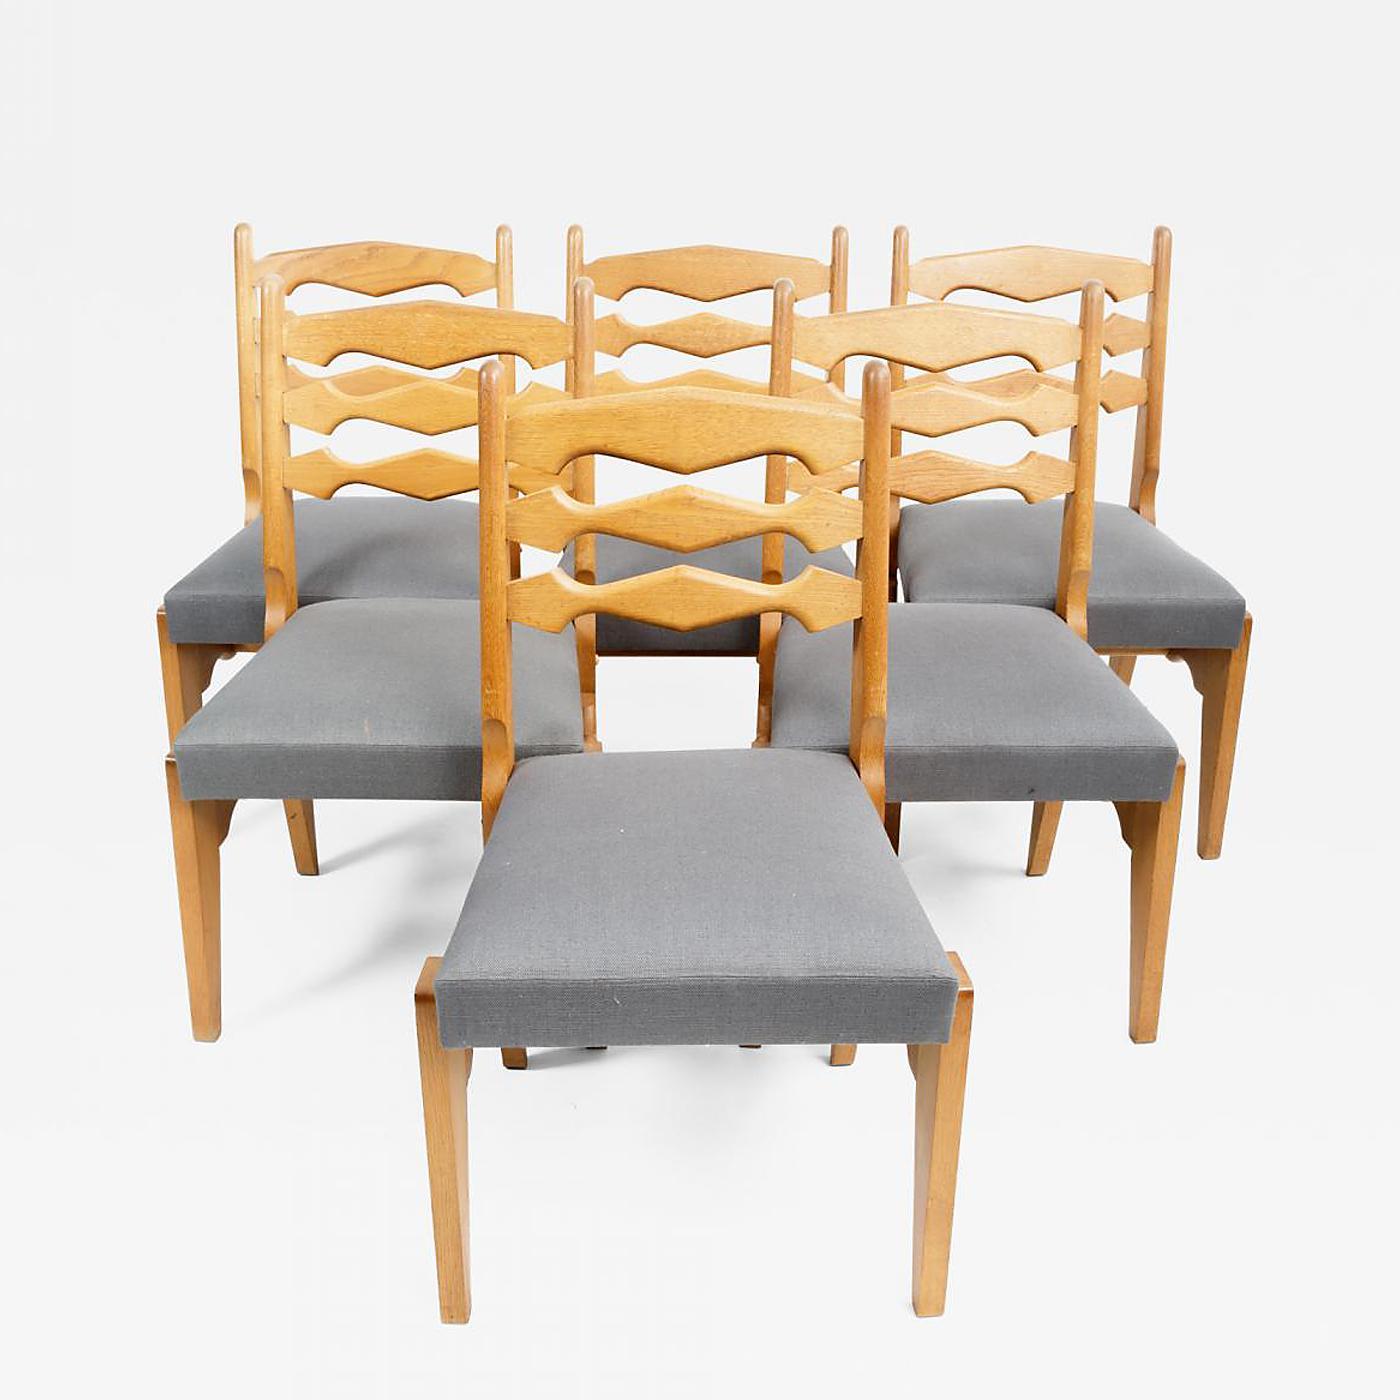 Set of six Oak and Upholstery Dining Chairs by Guillerme et Chambron, France, circa 1970s.

Incredible design consists of solid oak construction. Sculptural frames and backrests with angular legs and new upholstery in a slate blue linen fabric. 